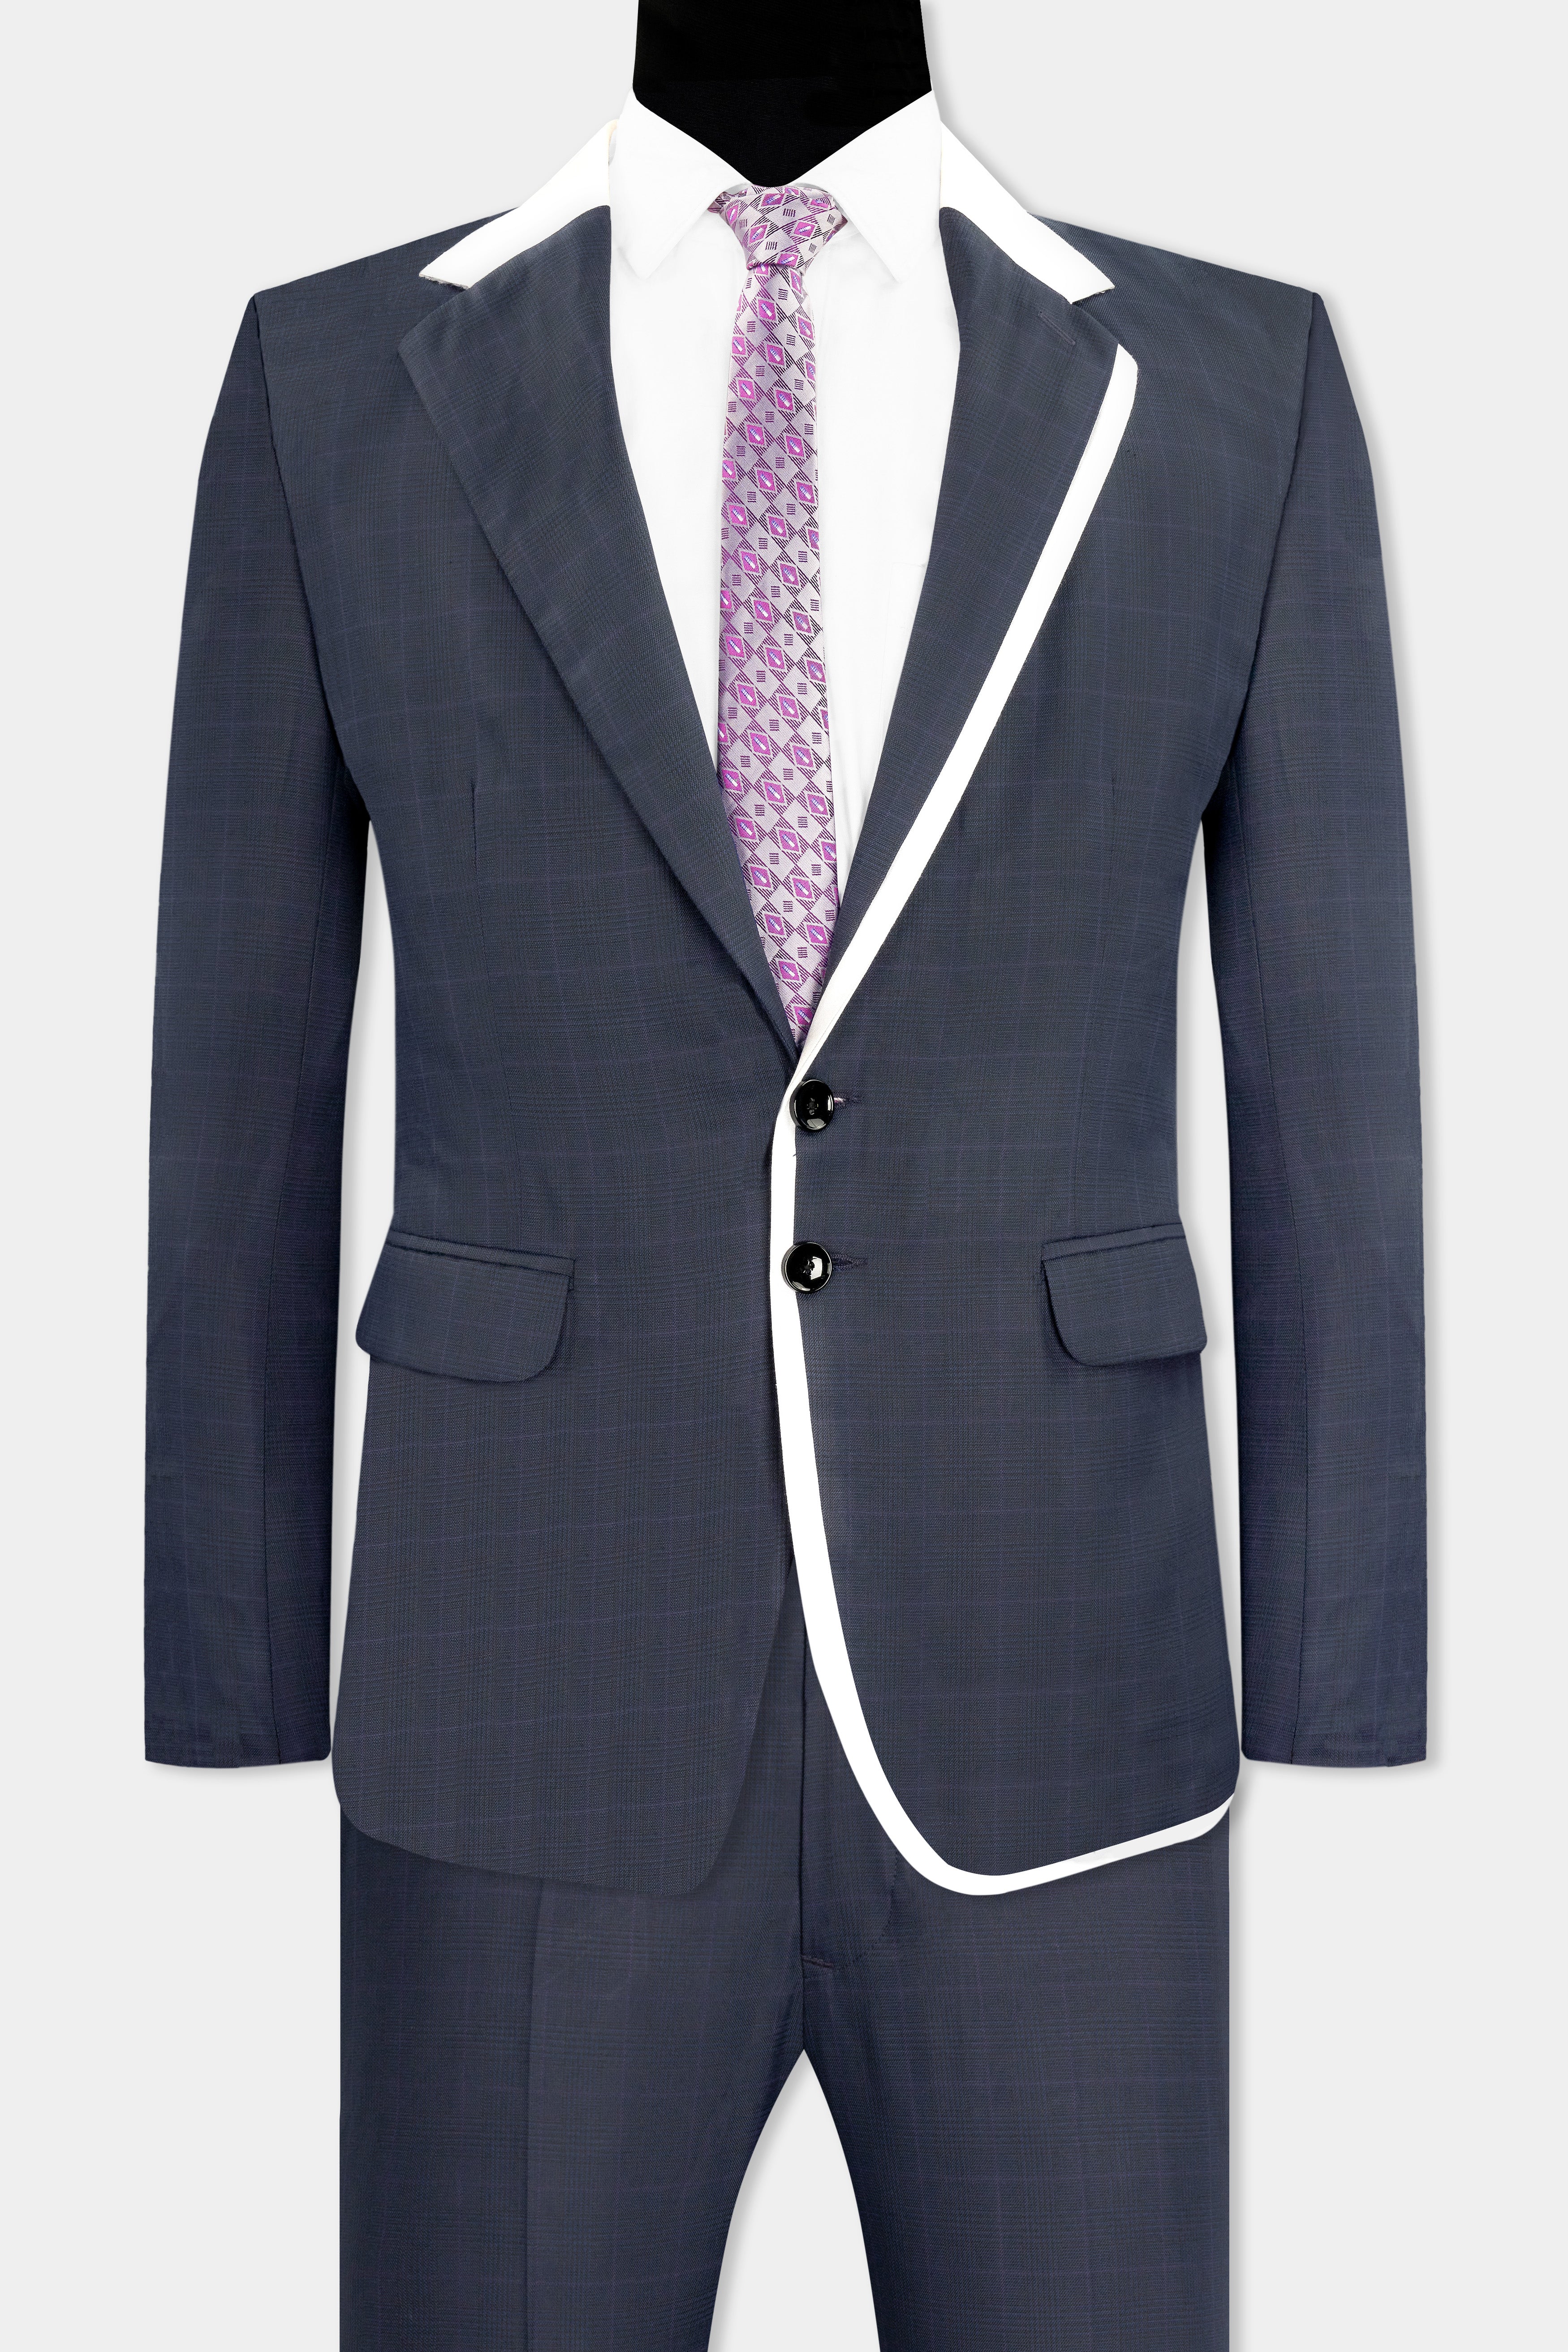 Baltic Blue with White Piping Work and Checkered Wool Rich Designer Suit ST2737-SB-D84-36, ST2737-SB-D84-38, ST2737-SB-D84-40, ST2737-SB-D84-42, ST2737-SB-D84-44, ST2737-SB-D84-46, ST2737-SB-D84-48, ST2737-SB-D84-50, ST2737-SB-D84-52, ST2737-SB-D84-54, ST2737-SB-D84-56, ST2737-SB-D84-58, ST2737-SB-D84-60